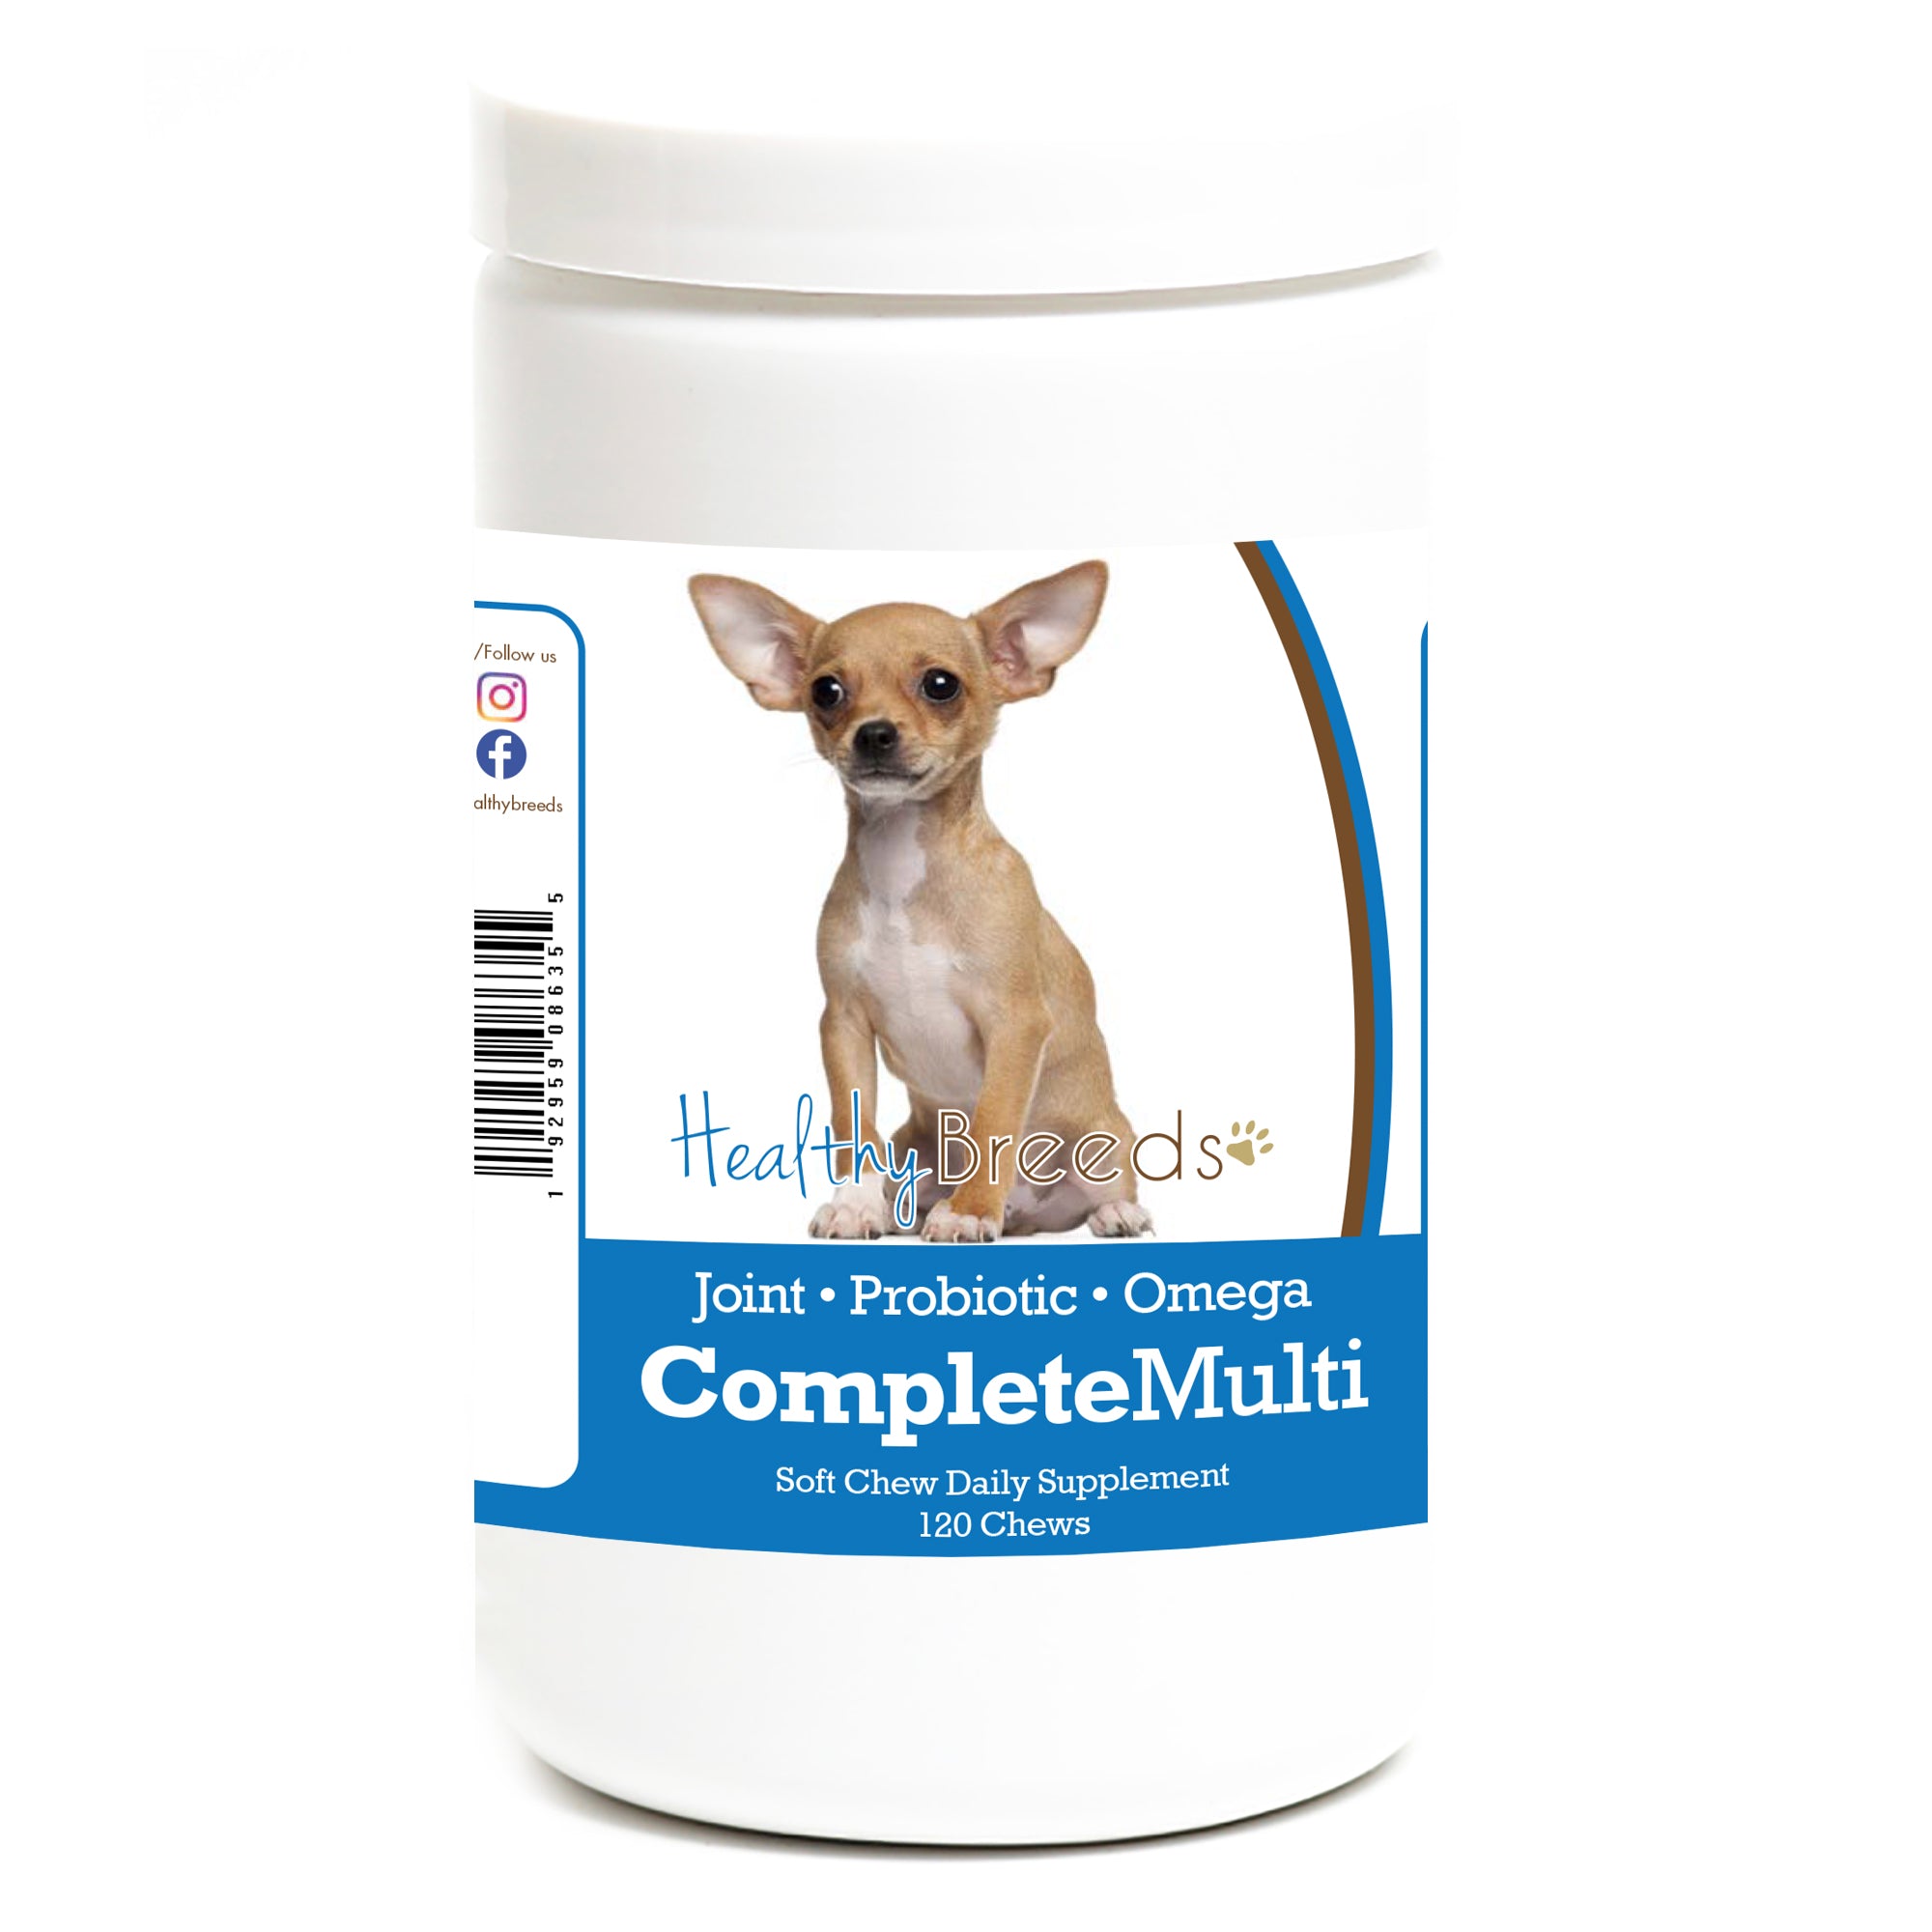 Healthy Breeds Chihuahua All In One Multivitamin Soft Chew 120 Count